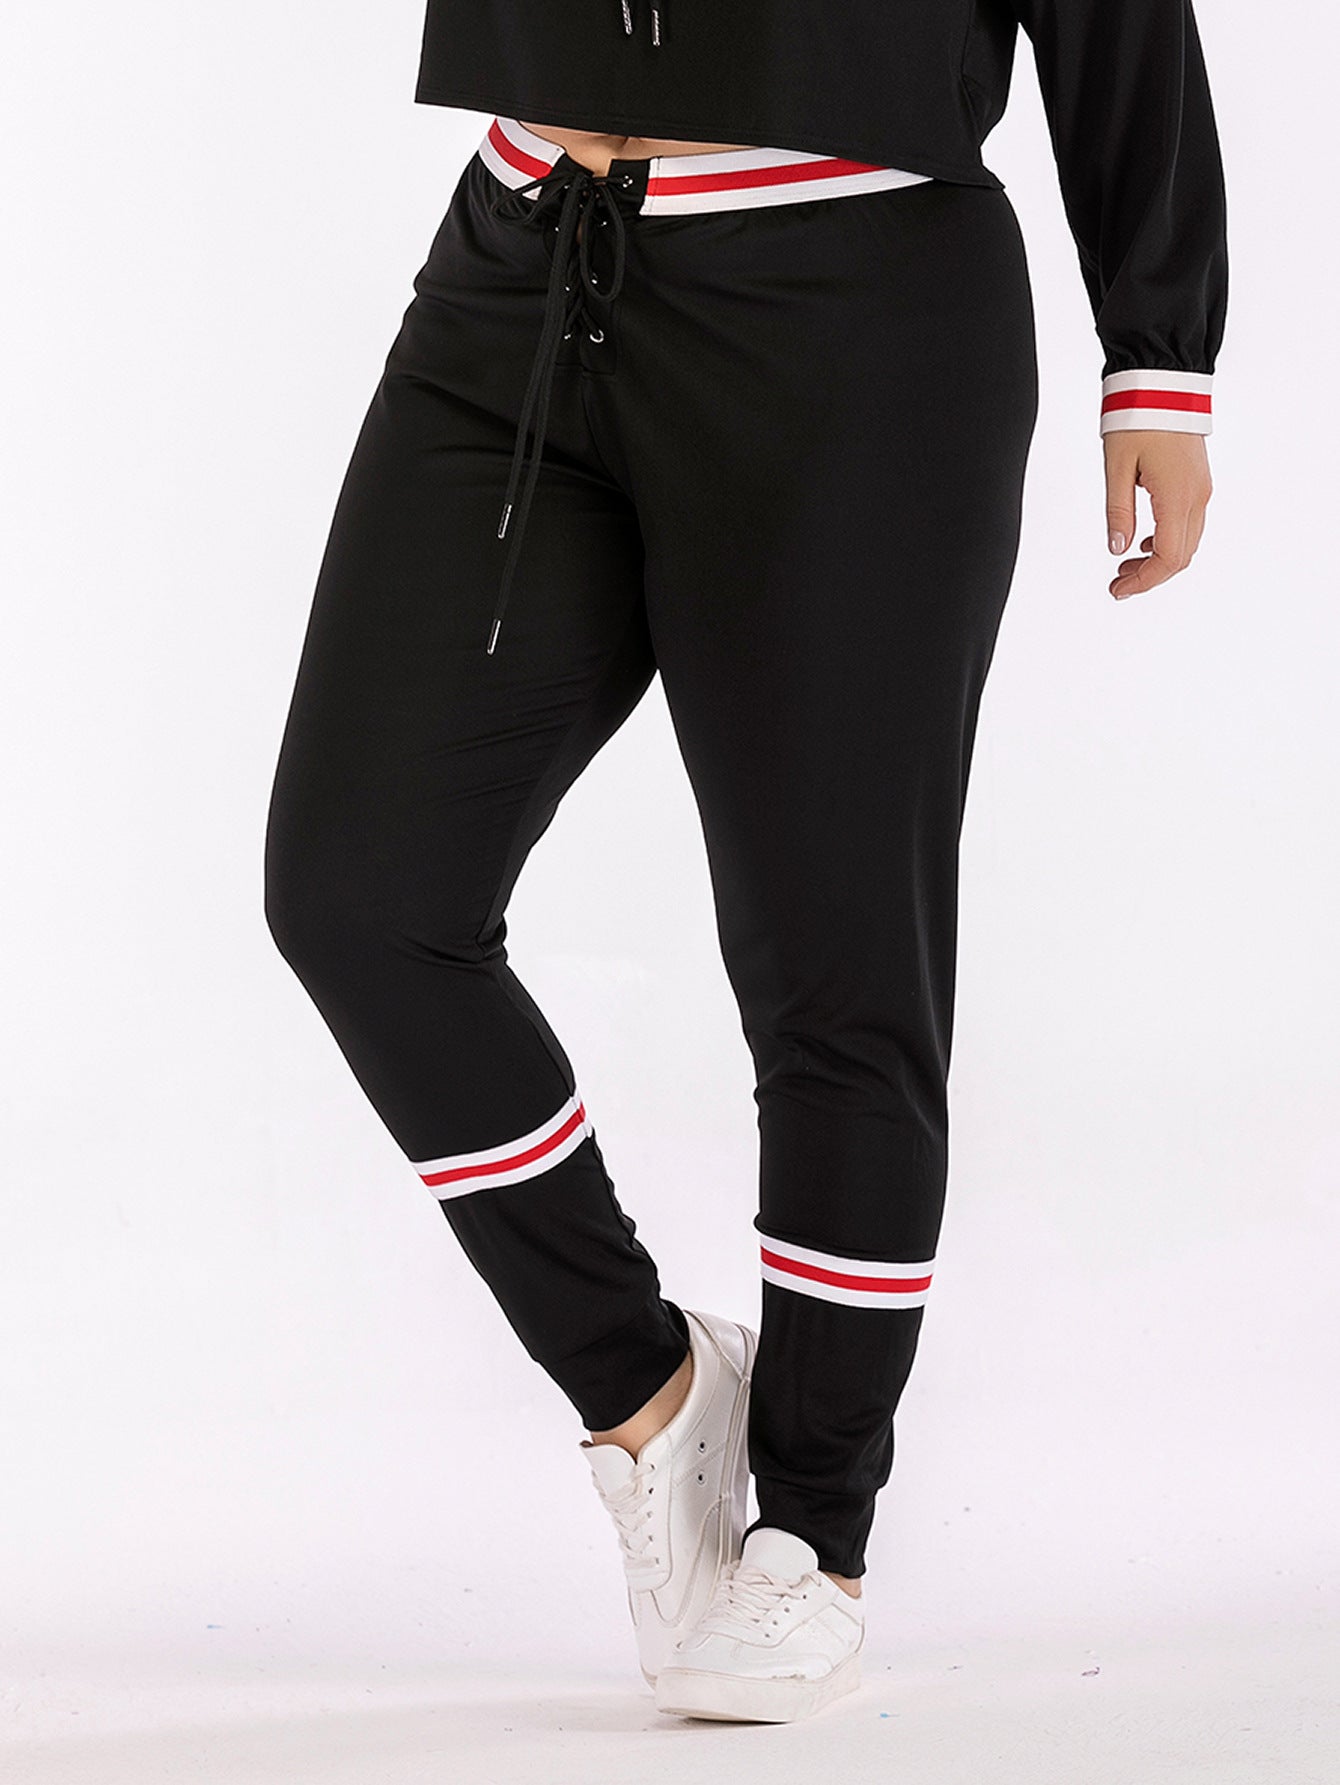 Women's pants with large size waistband  Pants Thecurvestory